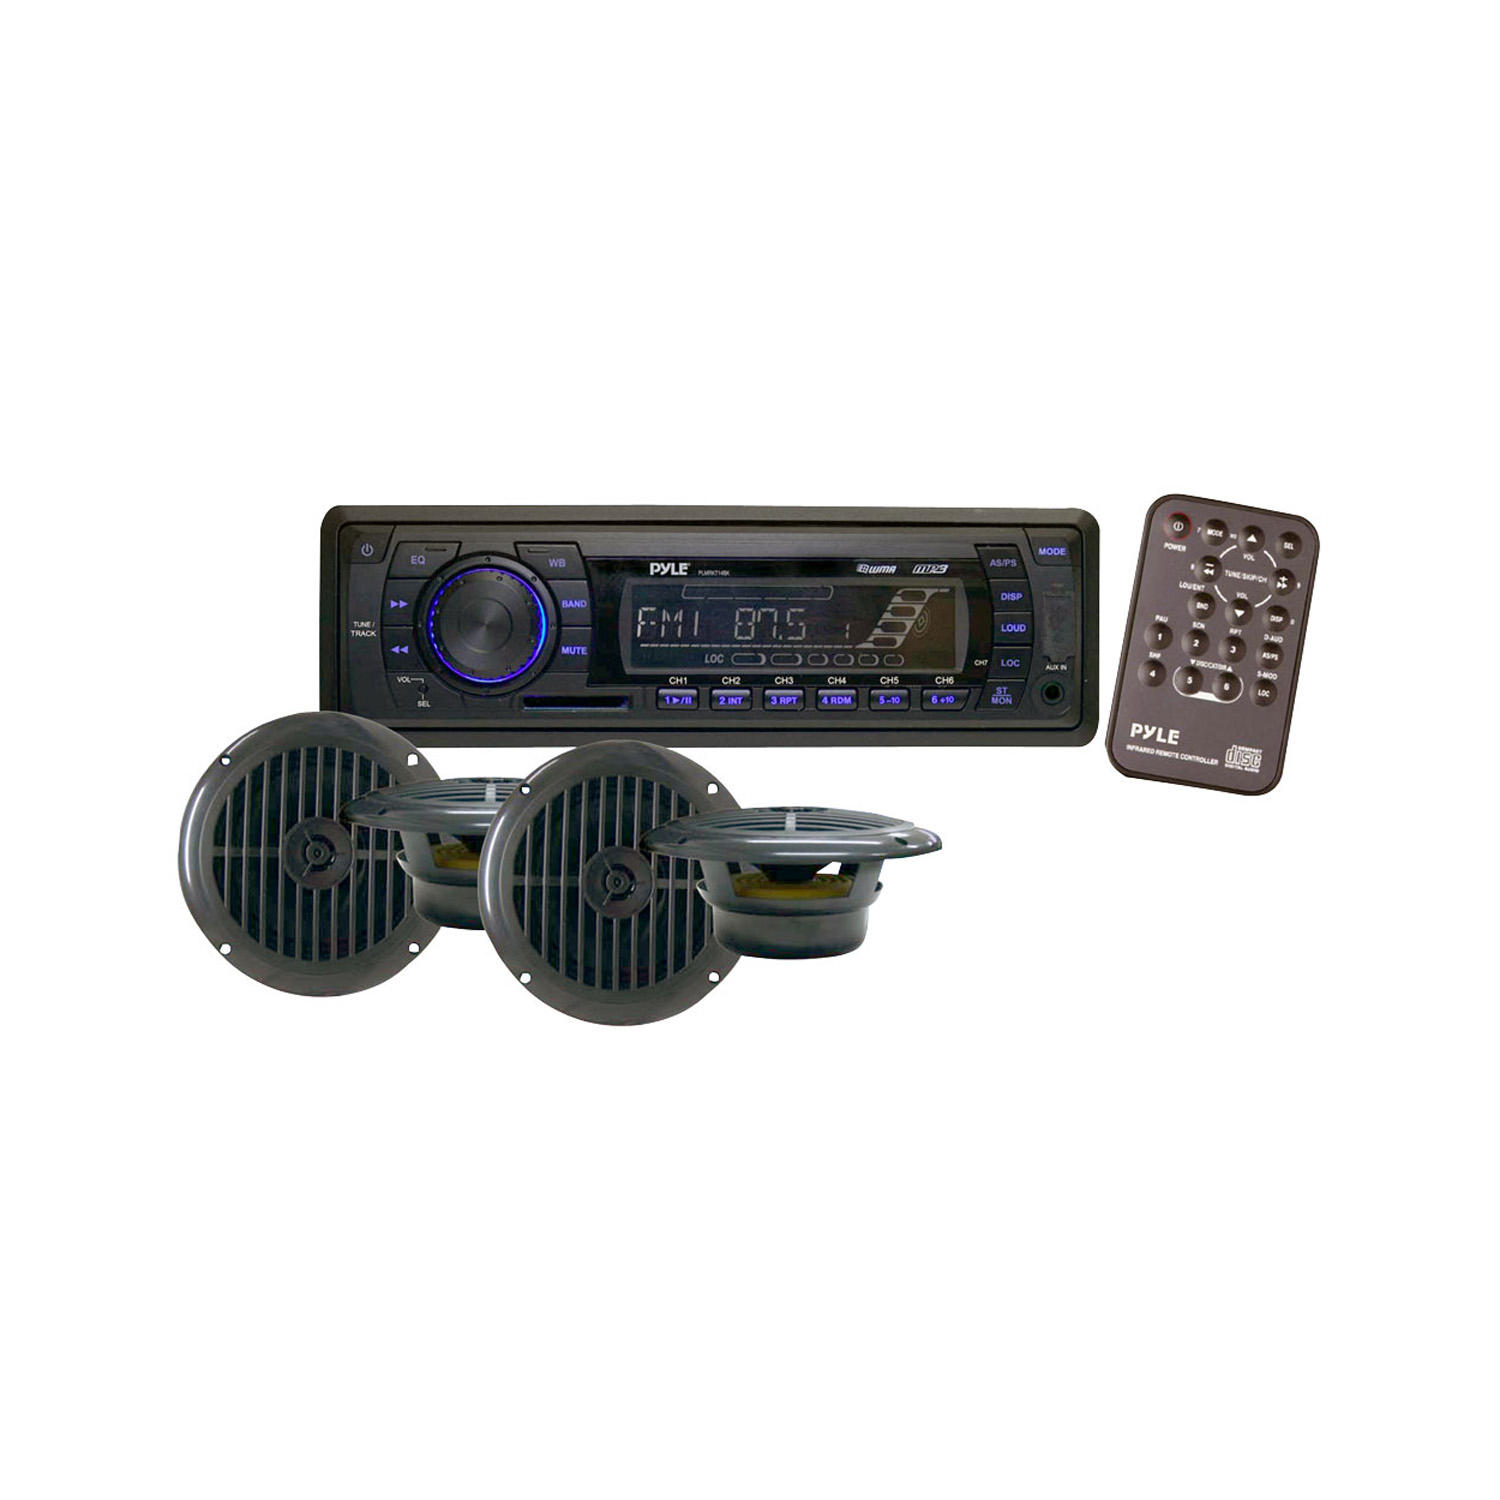 Pyle Marine Stereo Receiver and Speaker Kit - Weather Band AM/FM Radio Headunit - (4) Waterproof 6.5" Speakers, MP3/USB/SD/AUX, Single DIN, 4 x 50 Watt - image 1 of 1